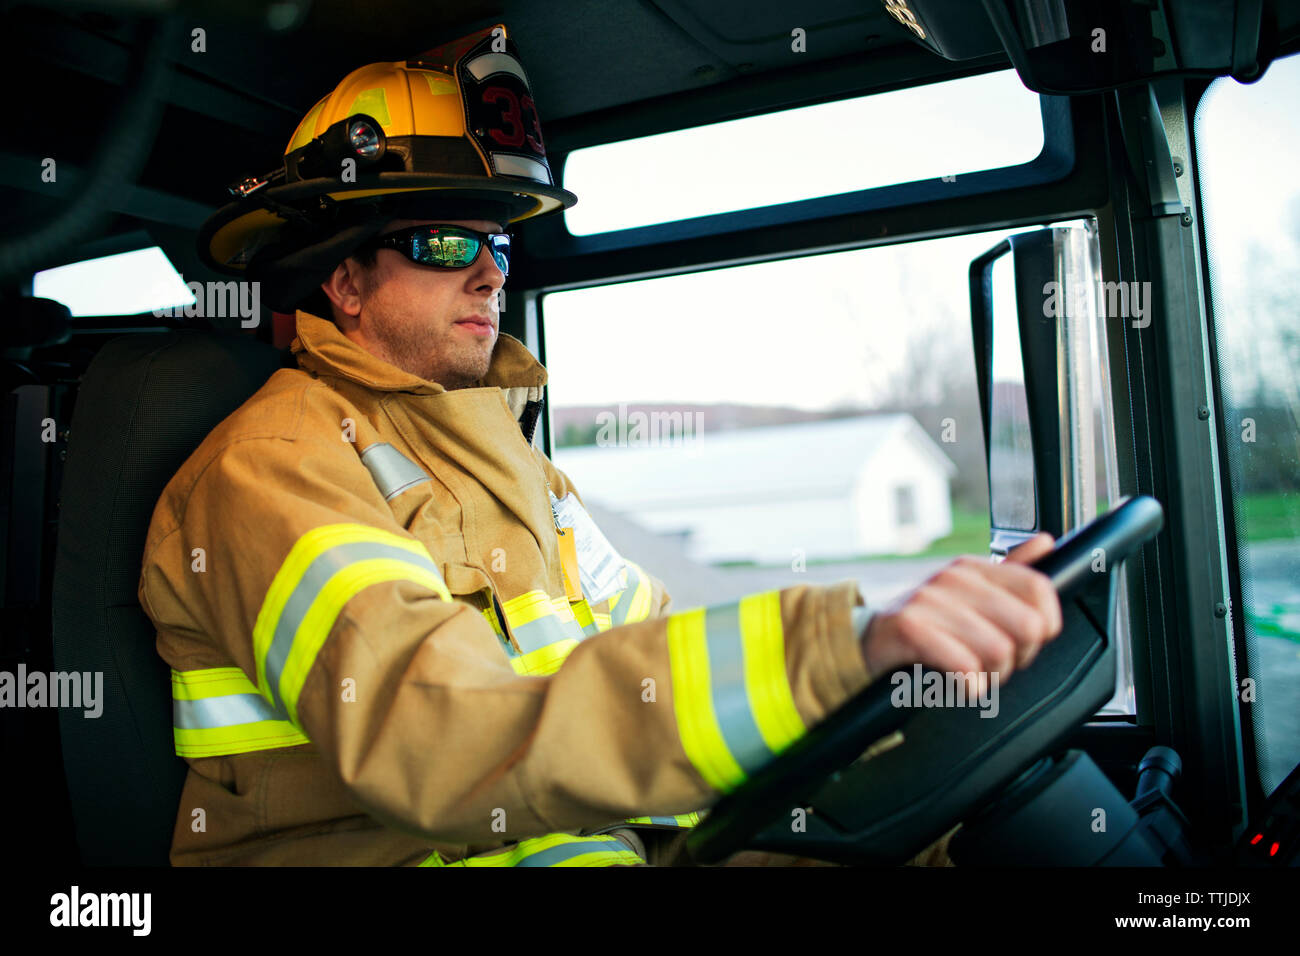 Confident firefighter driving fire engine Stock Photo